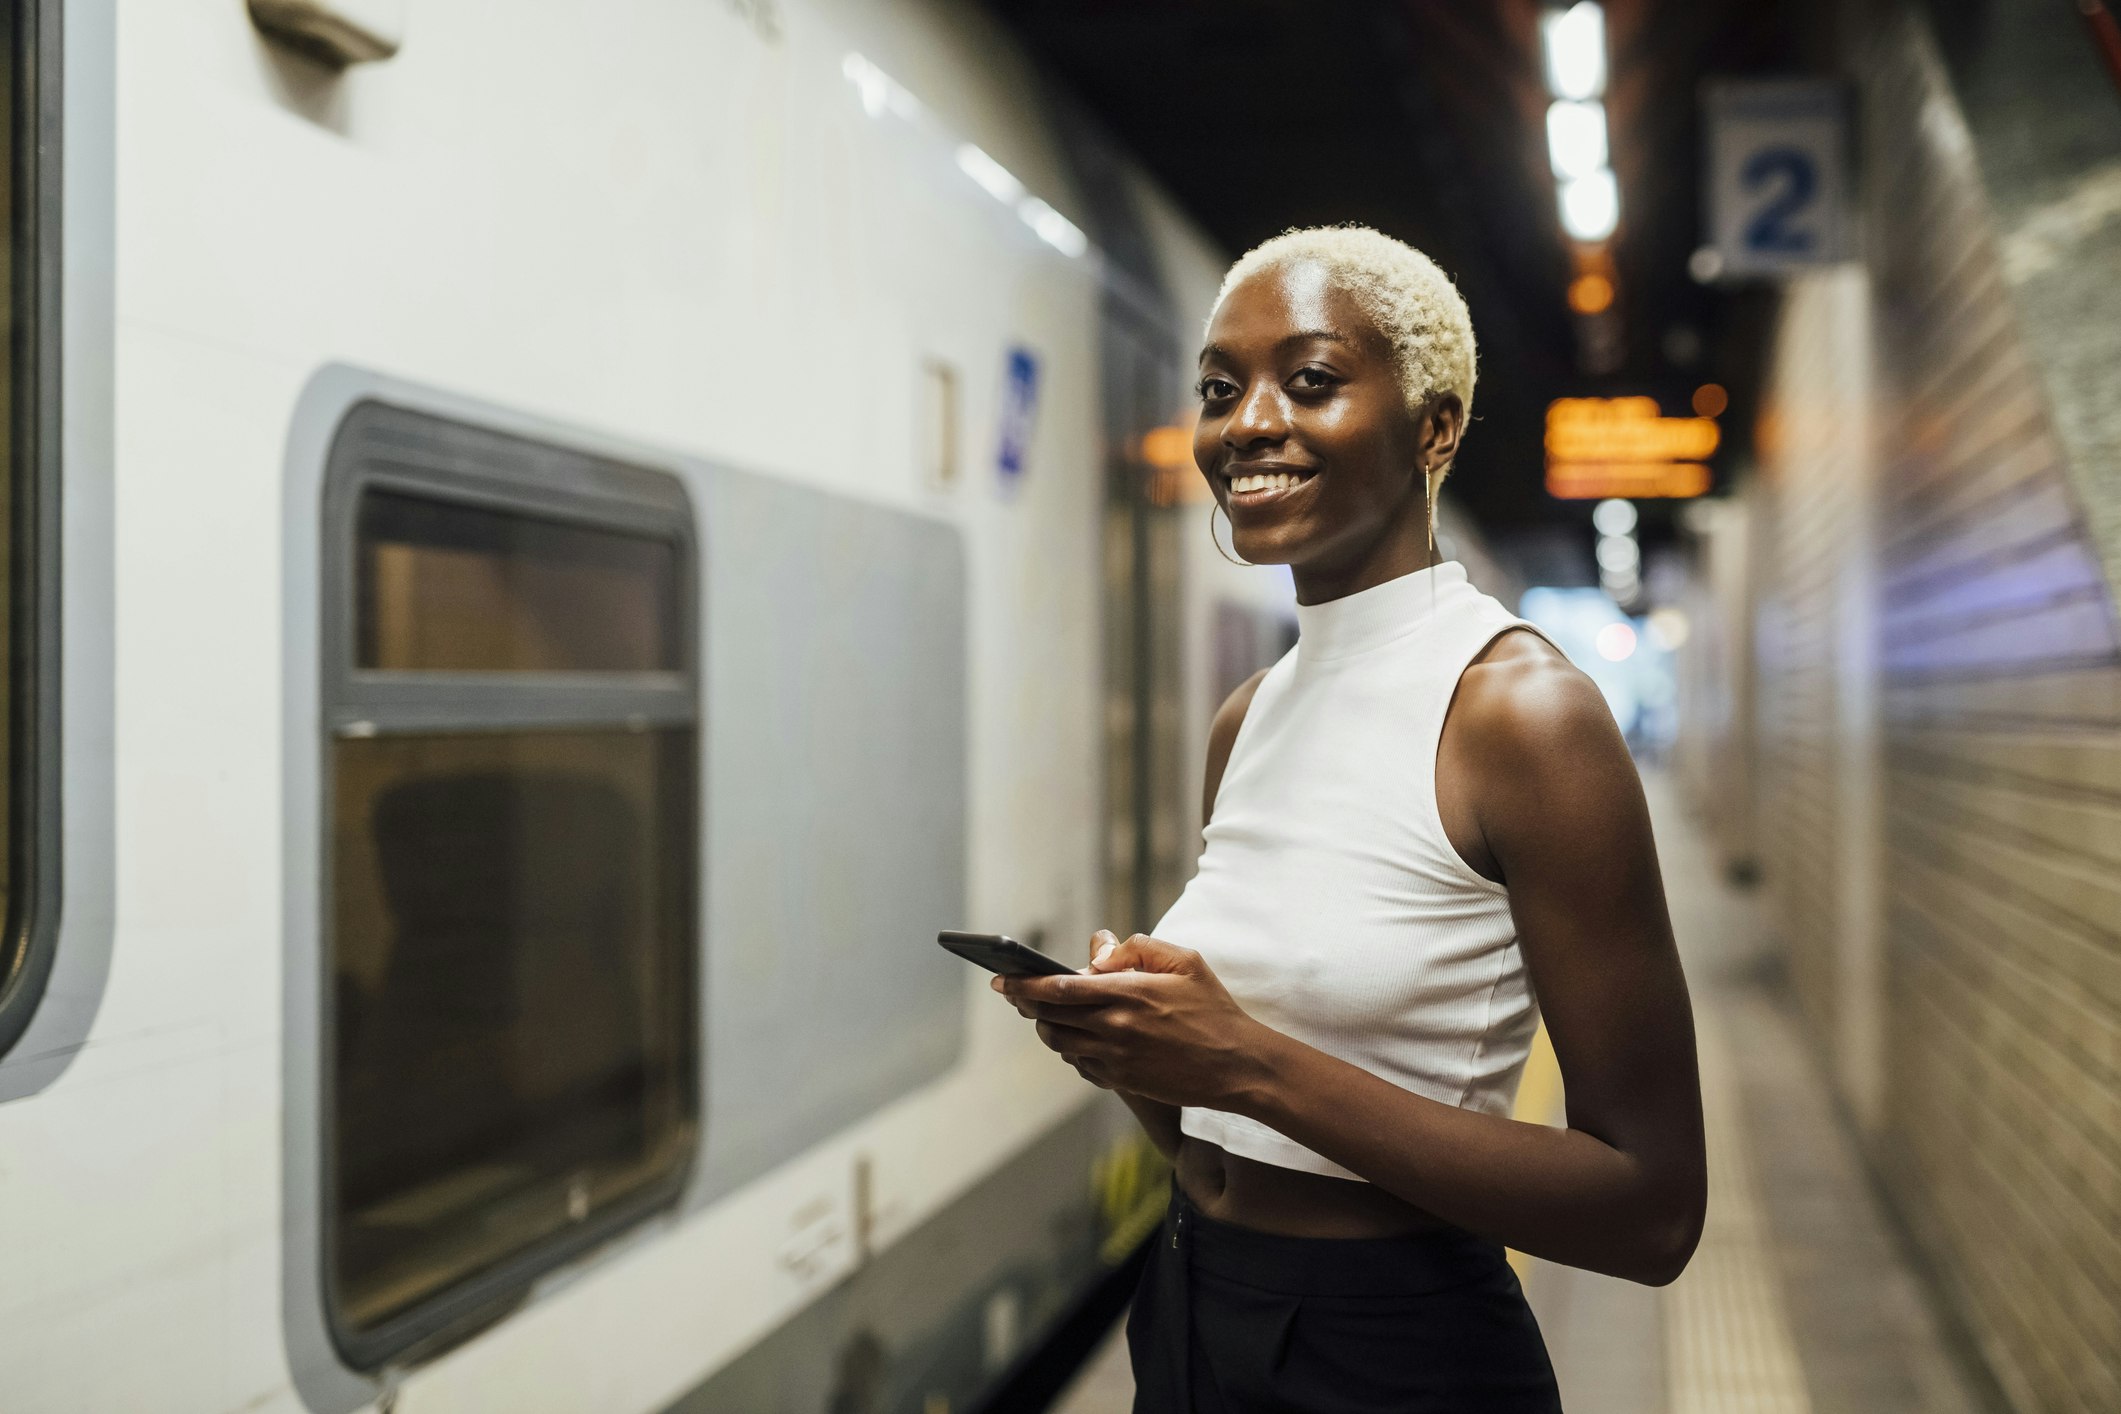 Smiling woman holding a mobile phone while standing on a subway platform